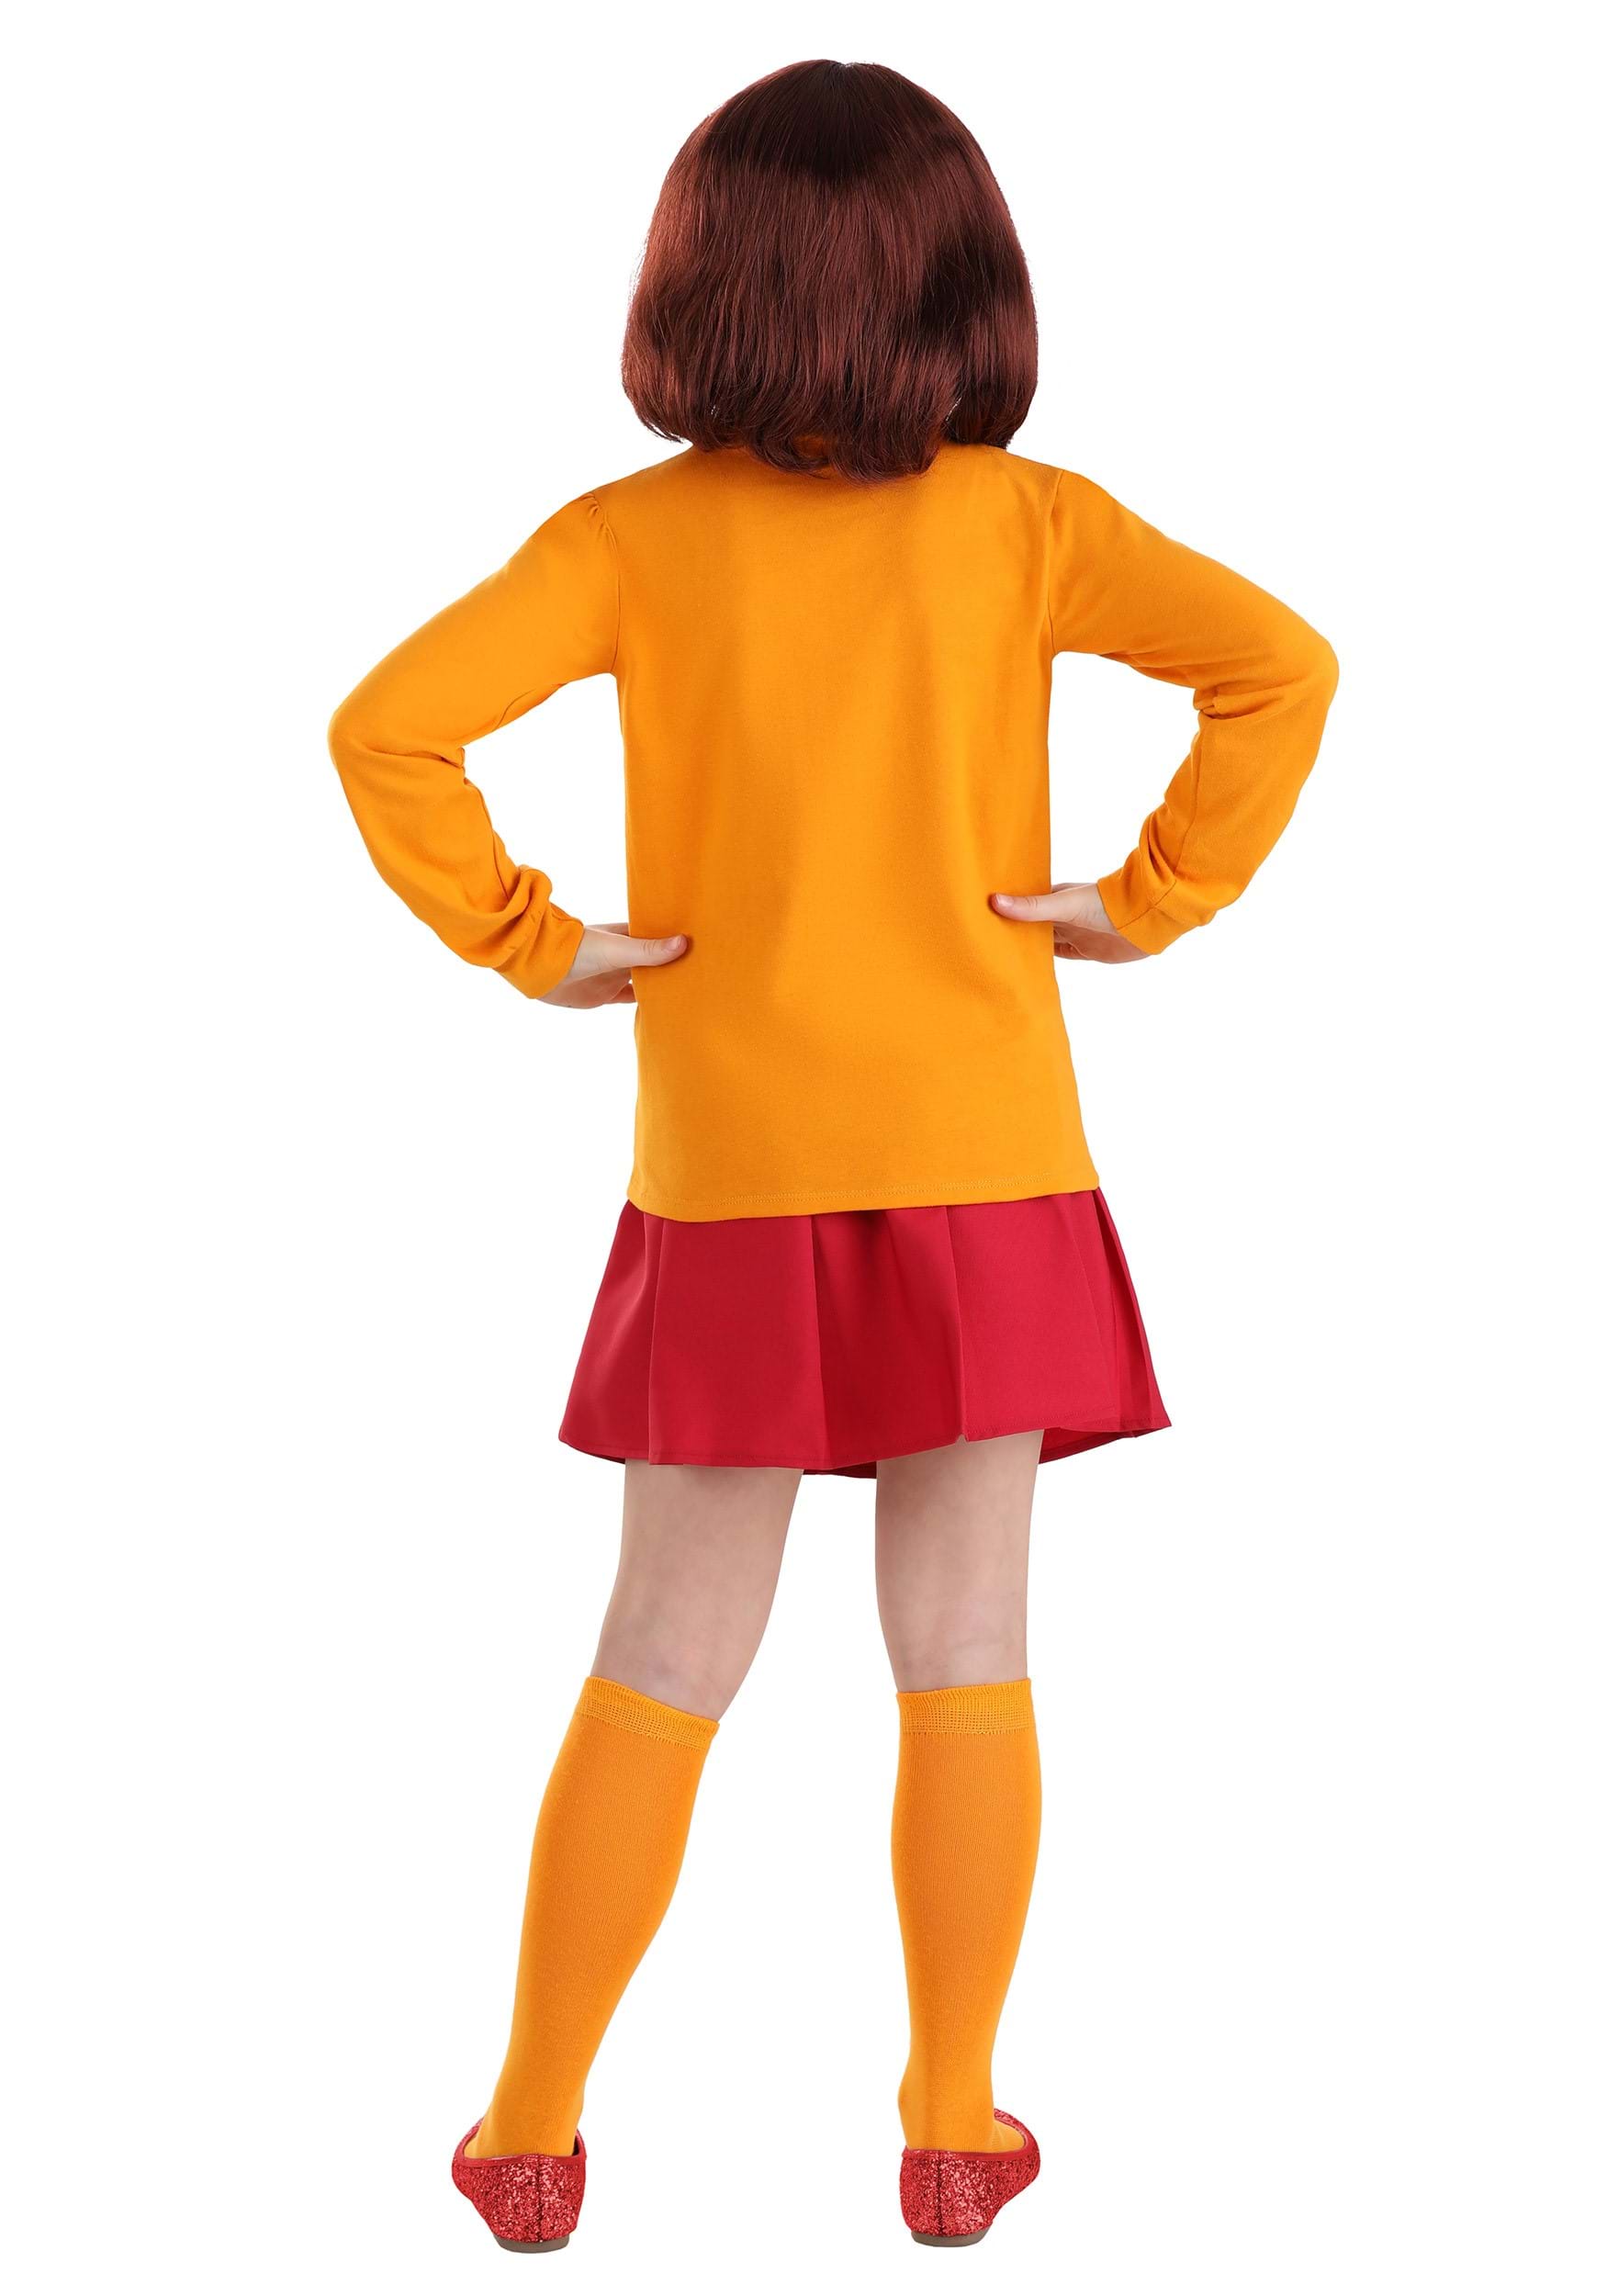 Velma costume for girls - Official Scooby Doo